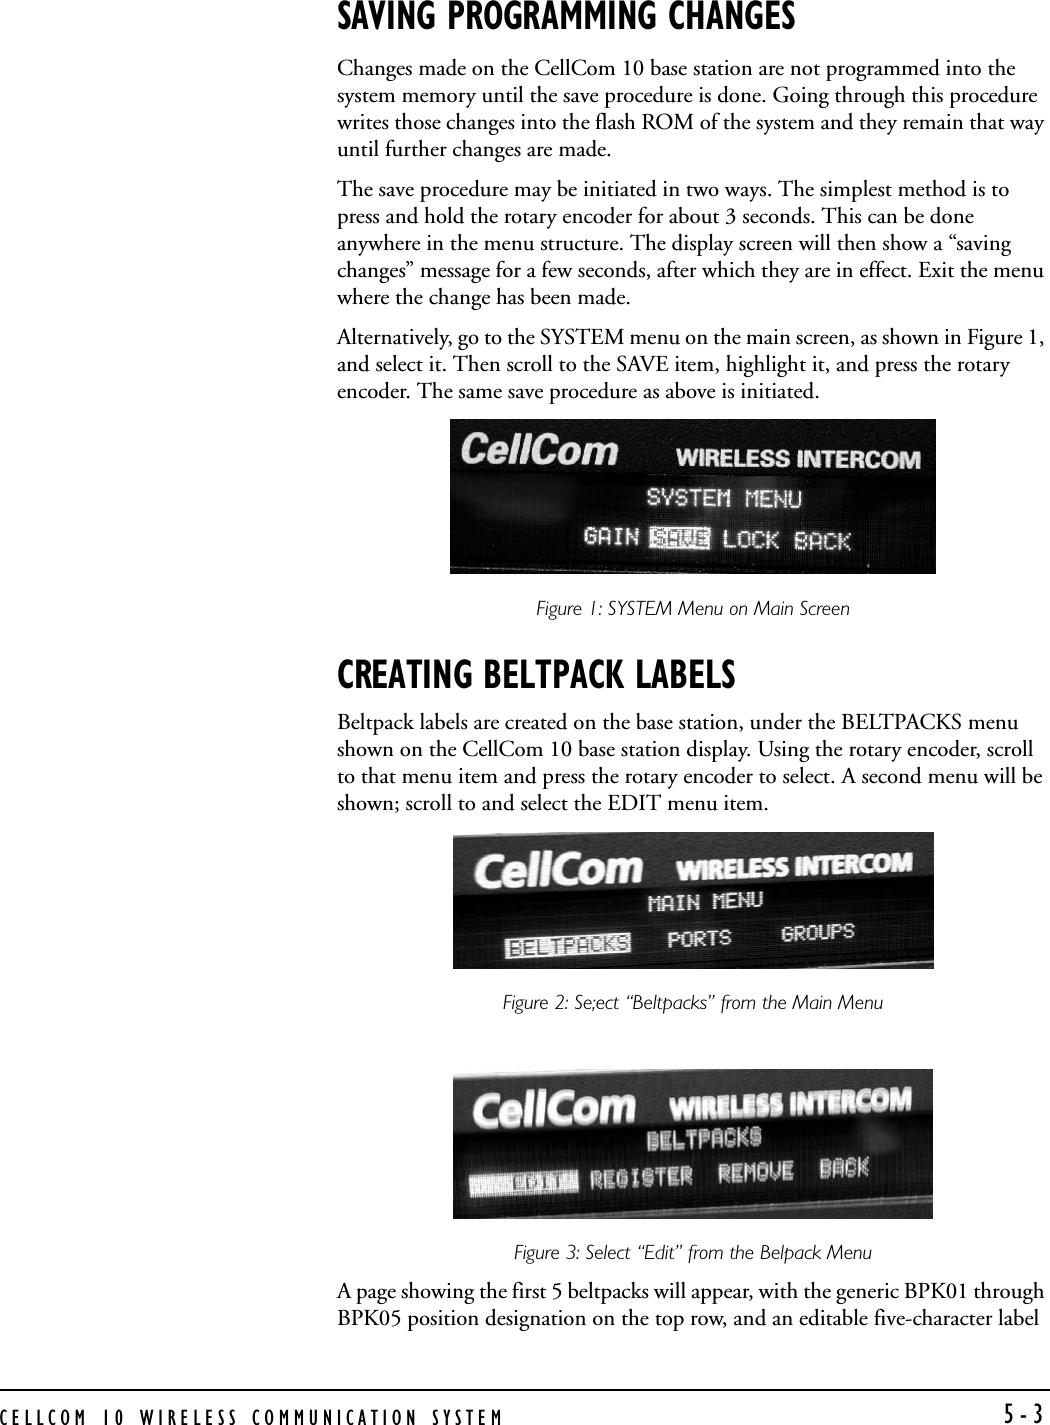 CELLCOM 10 WIRELESS COMMUNICATION SYSTEM 5-3SAVING PROGRAMMING CHANGESChanges made on the CellCom 10 base station are not programmed into the system memory until the save procedure is done. Going through this procedure writes those changes into the flash ROM of the system and they remain that way until further changes are made. The save procedure may be initiated in two ways. The simplest method is to press and hold the rotary encoder for about 3 seconds. This can be done anywhere in the menu structure. The display screen will then show a “saving changes” message for a few seconds, after which they are in effect. Exit the menu where the change has been made.  Alternatively, go to the SYSTEM menu on the main screen, as shown in Figure 1, and select it. Then scroll to the SAVE item, highlight it, and press the rotary encoder. The same save procedure as above is initiated.Figure 1: SYSTEM Menu on Main Screen CREATING BELTPACK LABELSBeltpack labels are created on the base station, under the BELTPACKS menu shown on the CellCom 10 base station display. Using the rotary encoder, scroll to that menu item and press the rotary encoder to select. A second menu will be shown; scroll to and select the EDIT menu item. Figure 2: Se;ect “Beltpacks” from the Main Menu Figure 3: Select “Edit” from the Belpack Menu A page showing the first 5 beltpacks will appear, with the generic BPK01 through BPK05 position designation on the top row, and an editable five-character label 